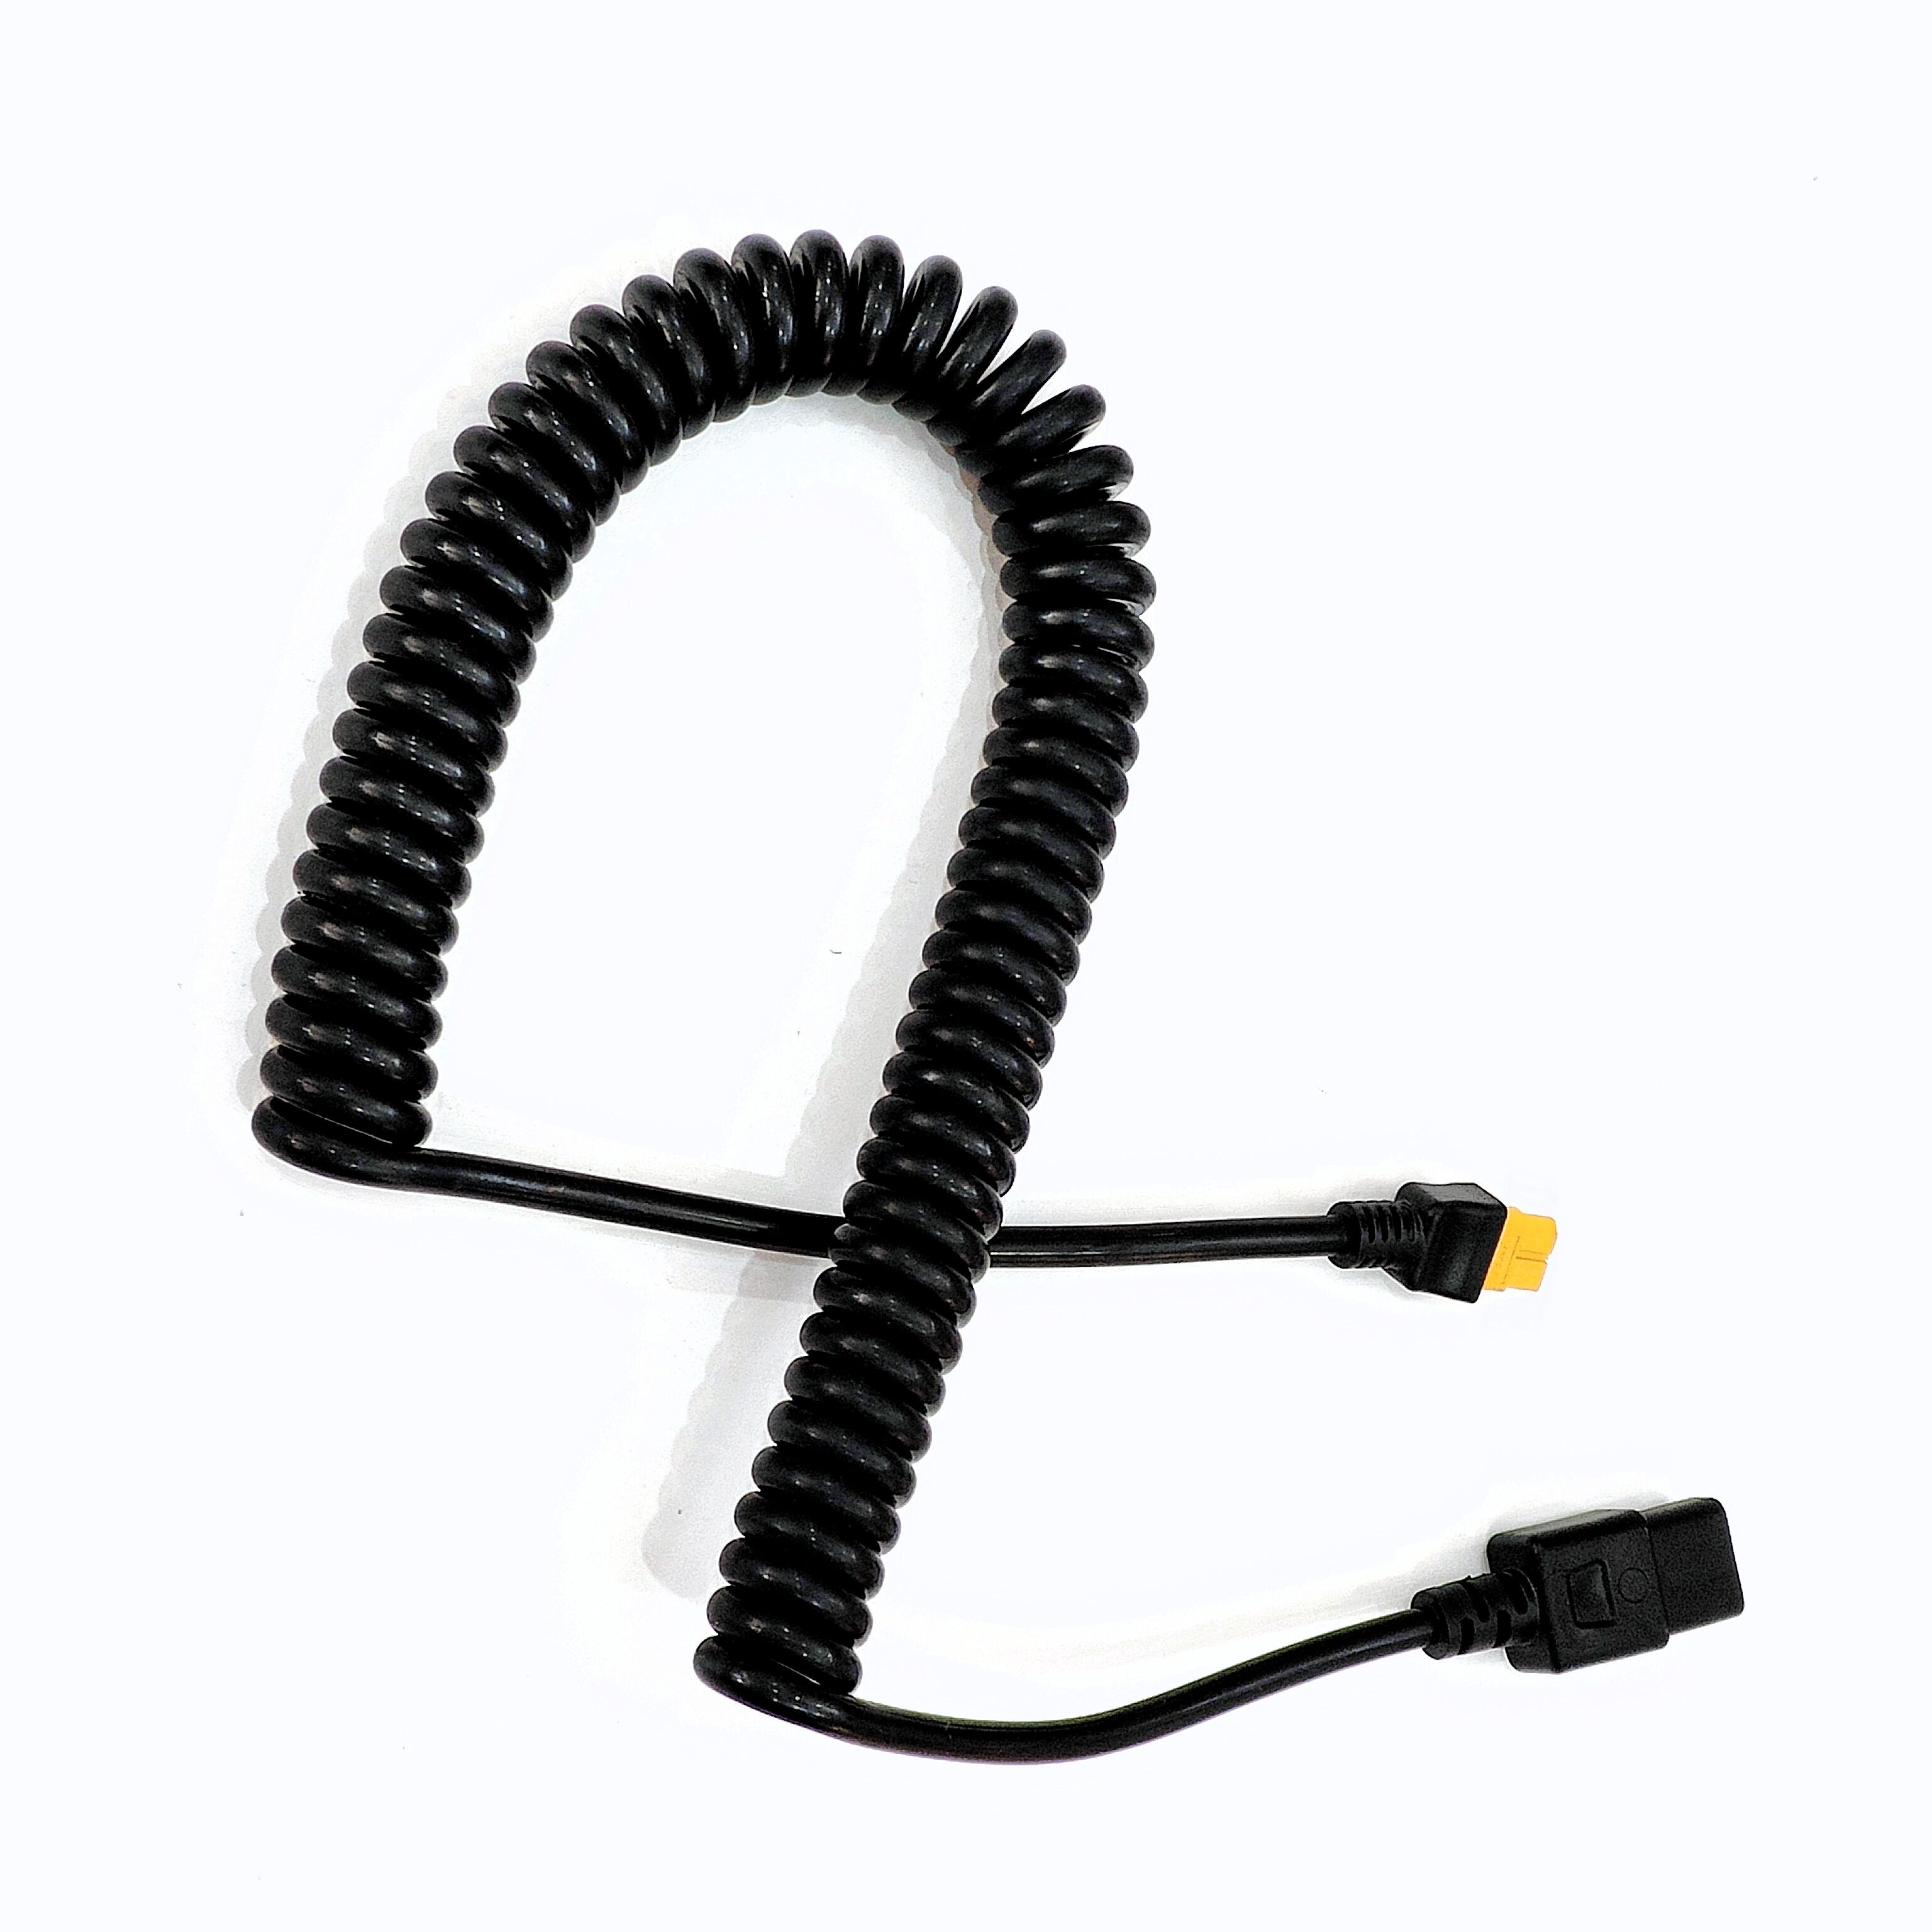 Xt60 Male With C14 Plug Spiral Cable. Xt60 Male Power Extension Spring Wire  - China Wholesale Spiral Cable ，xt60 ，spring Wire $3.5 from Ningbo Weiheng  Electronic Technology Co.,Ltd